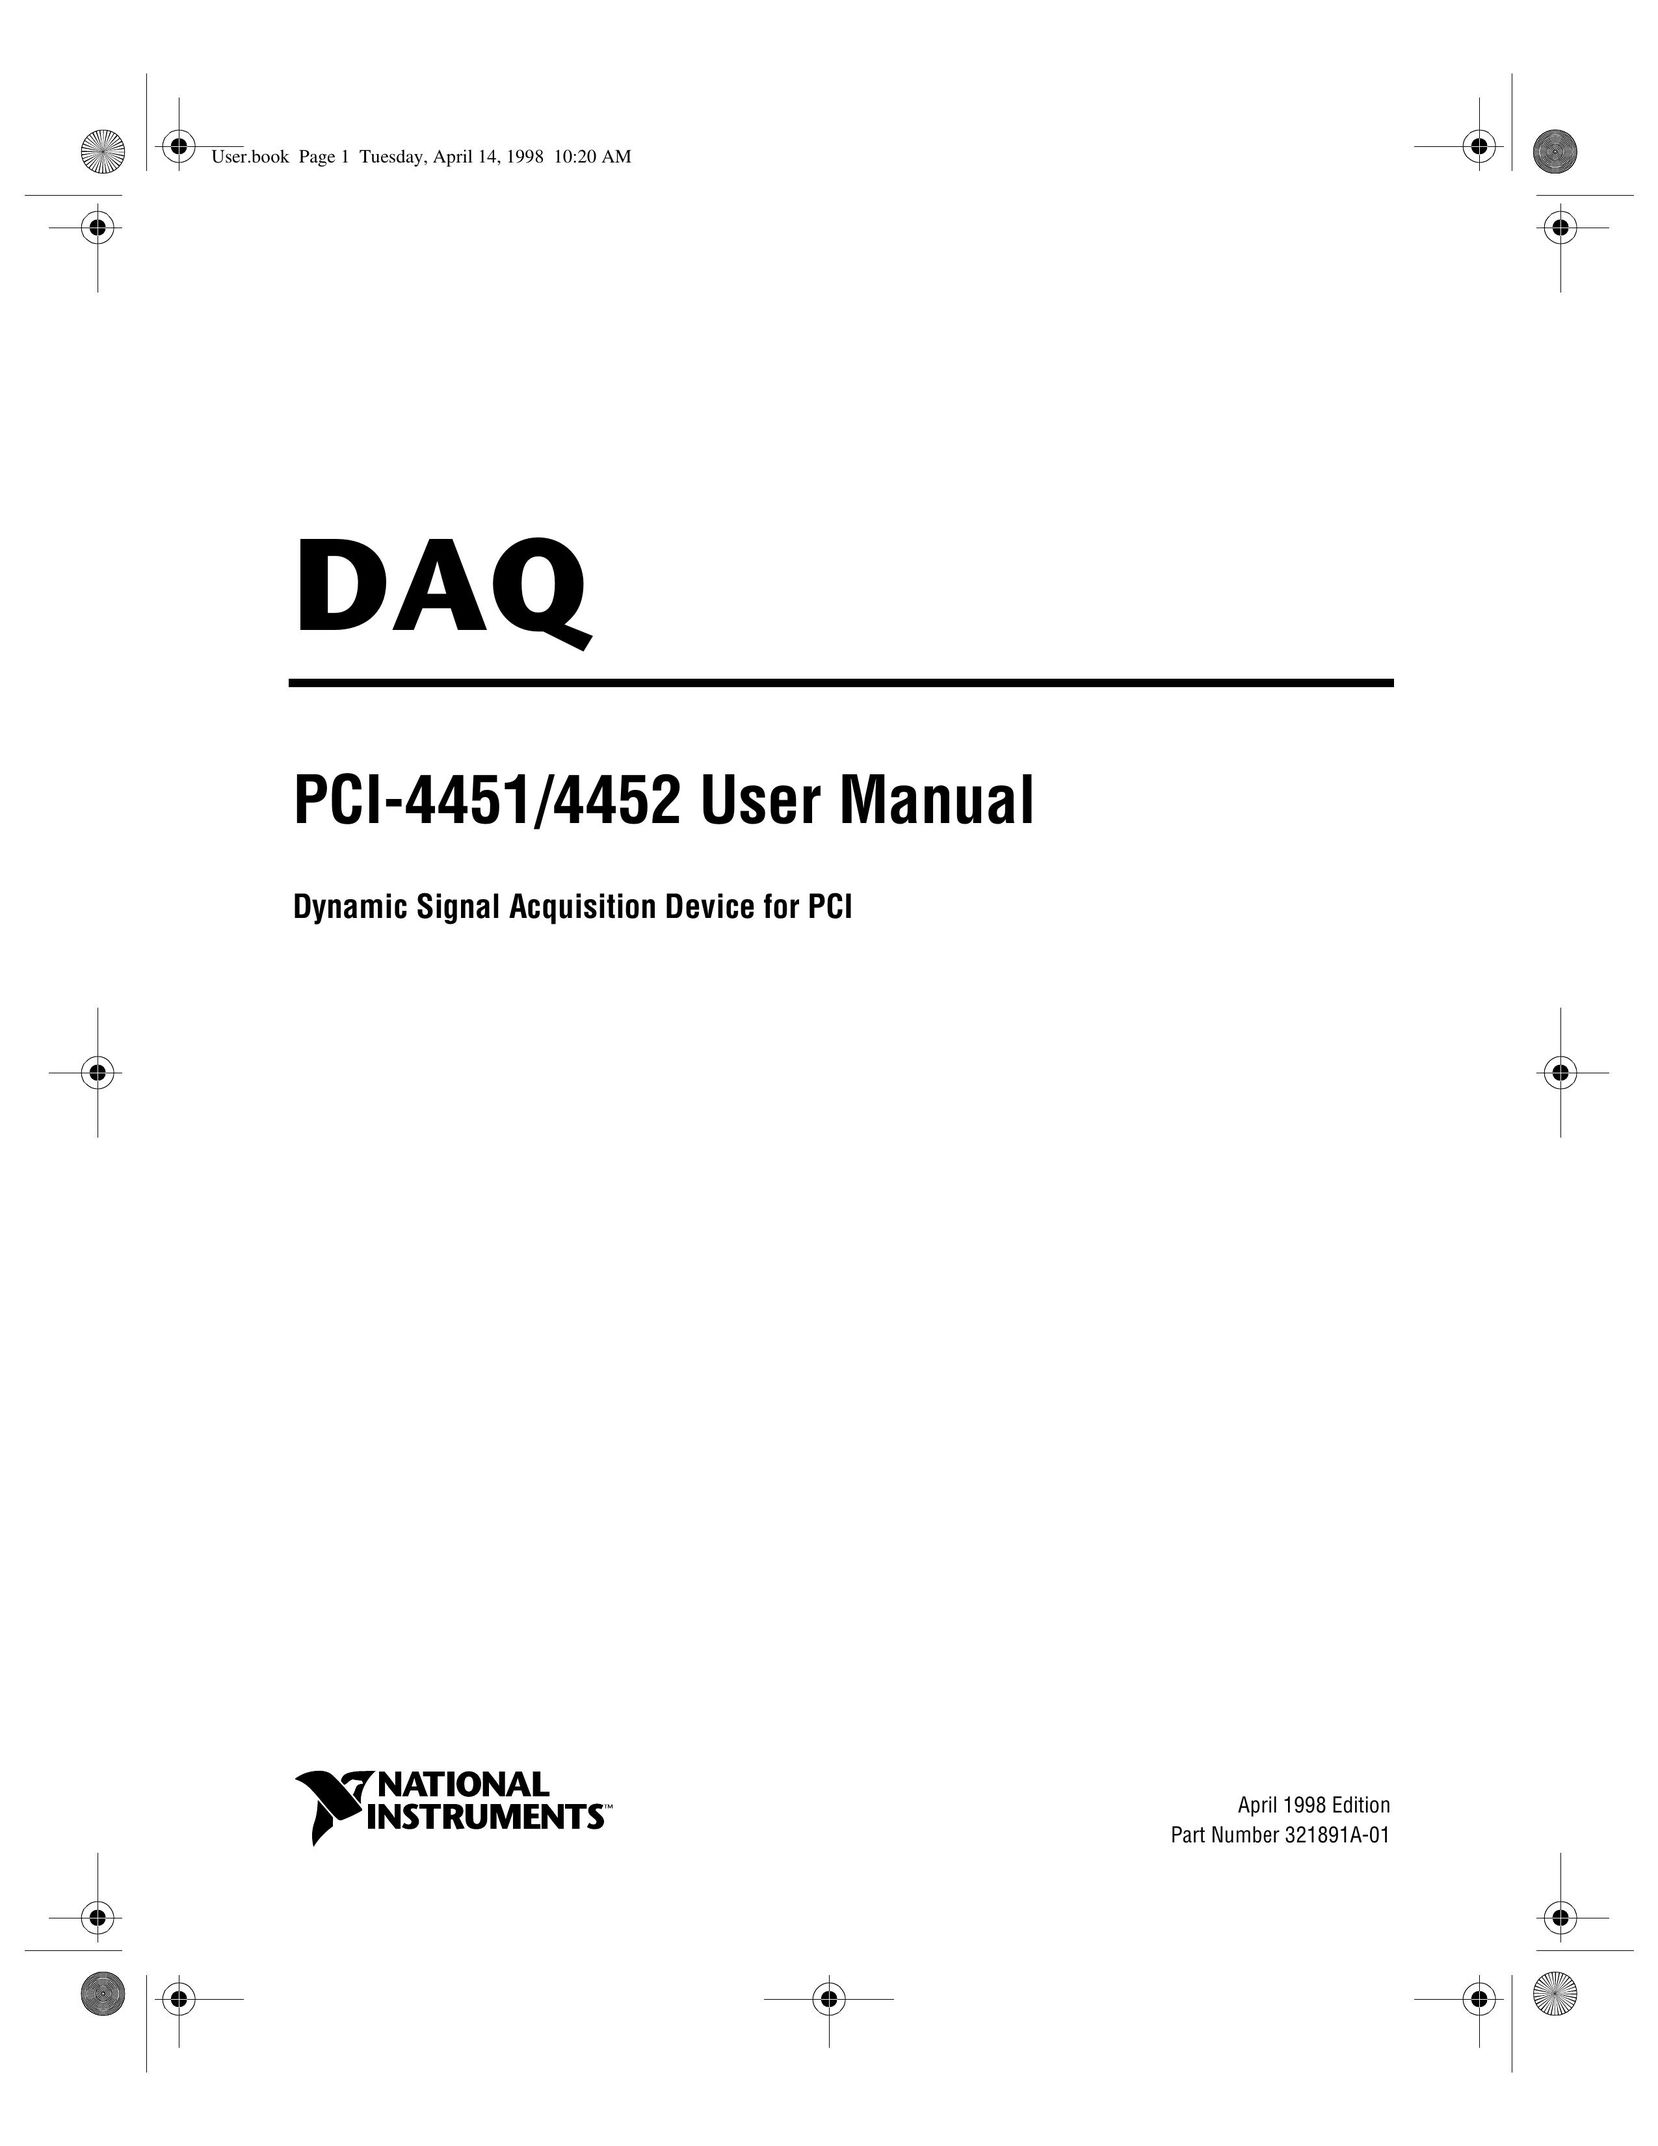 National Instruments PCI-4451 Switch User Manual